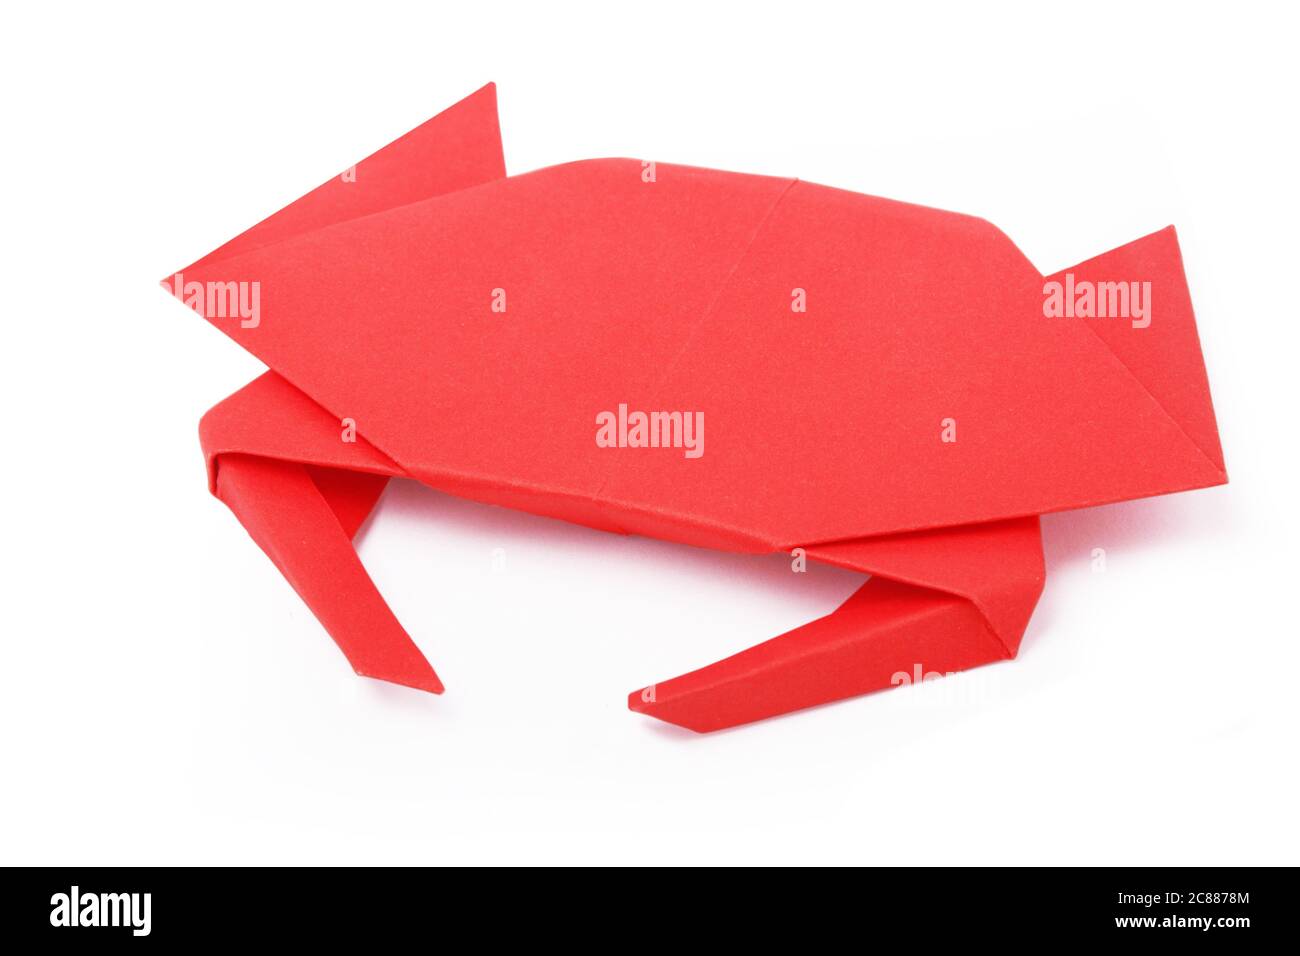 Origami paper crab on a white background Stock Photo